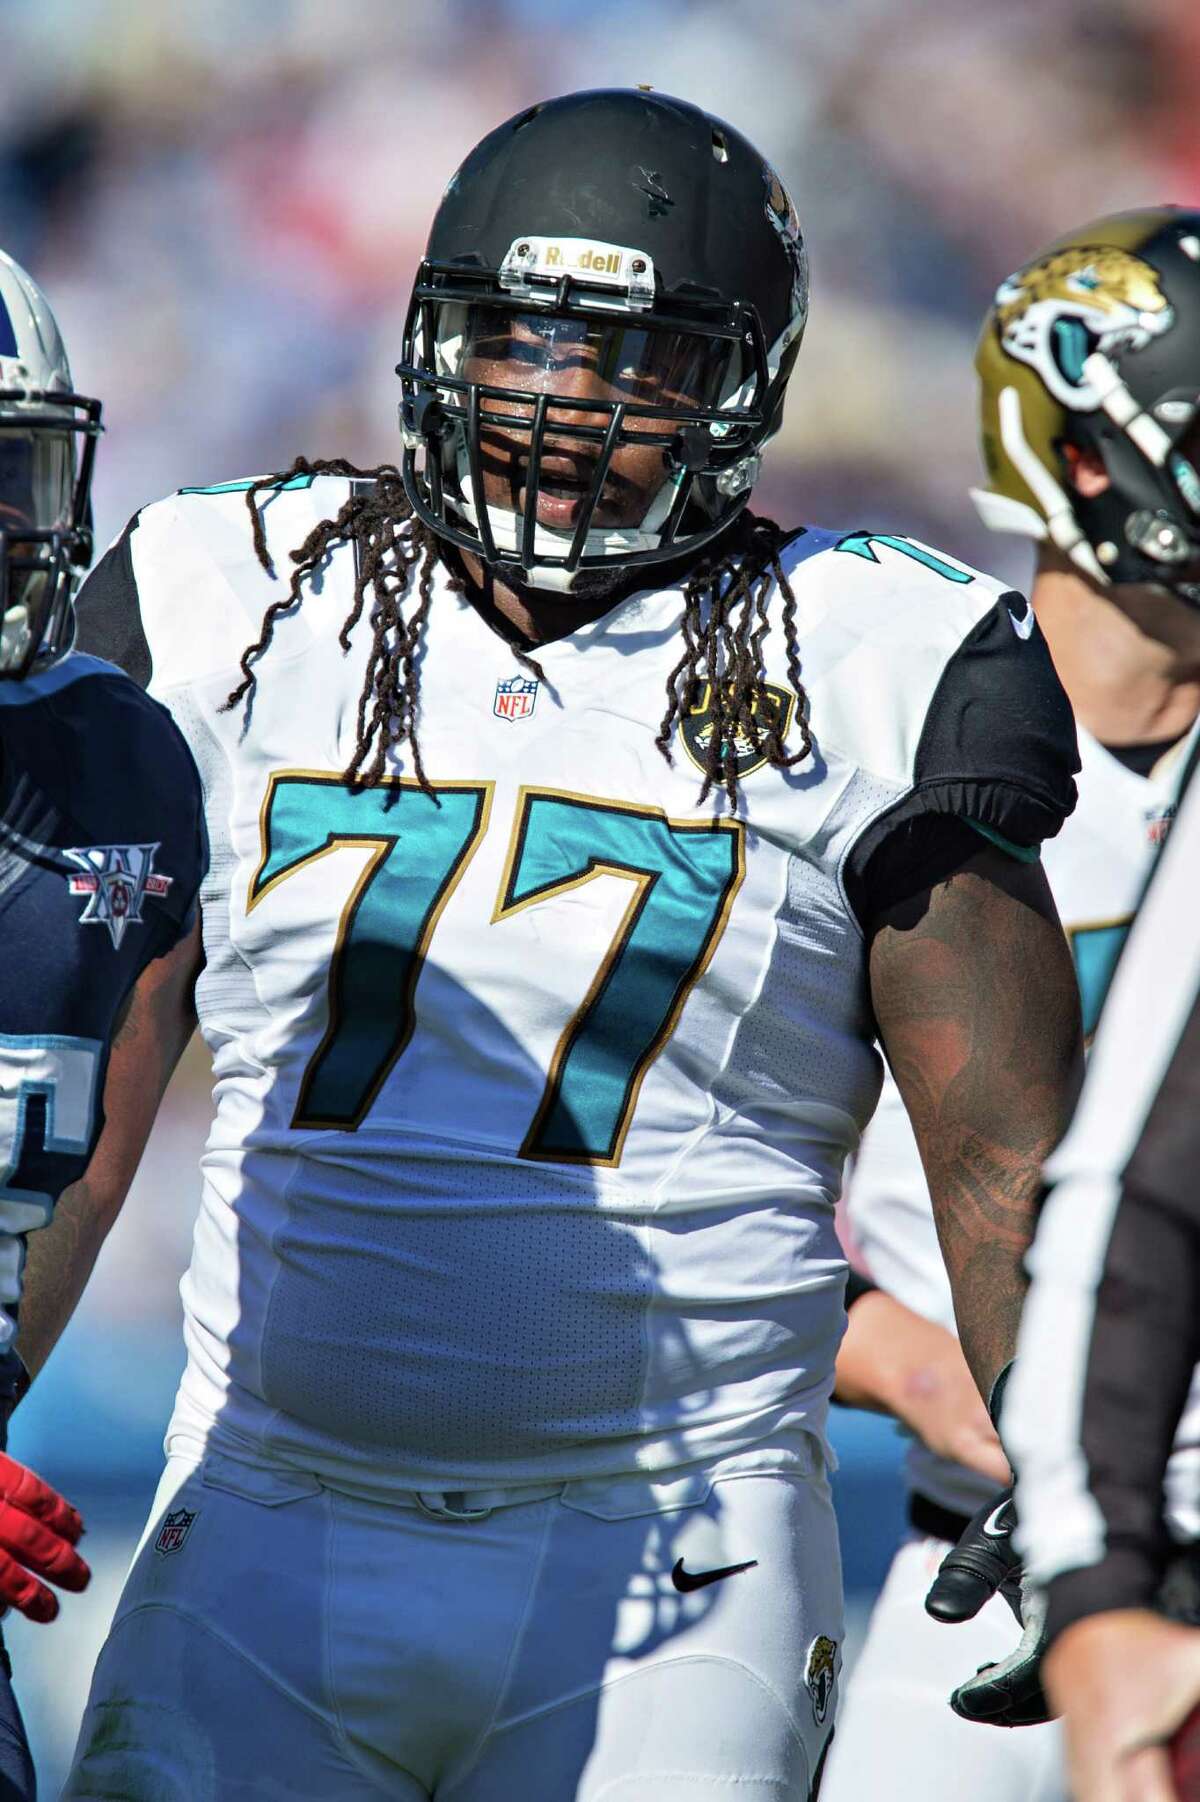 Uche Nwaneri #77 of the Jacksonville Jaguars on the field during play against the Tennessee Titans at LP Field on November 10, 2013 in Nashville, Tennessee. The Jaguars defeated the Titans 29-27.